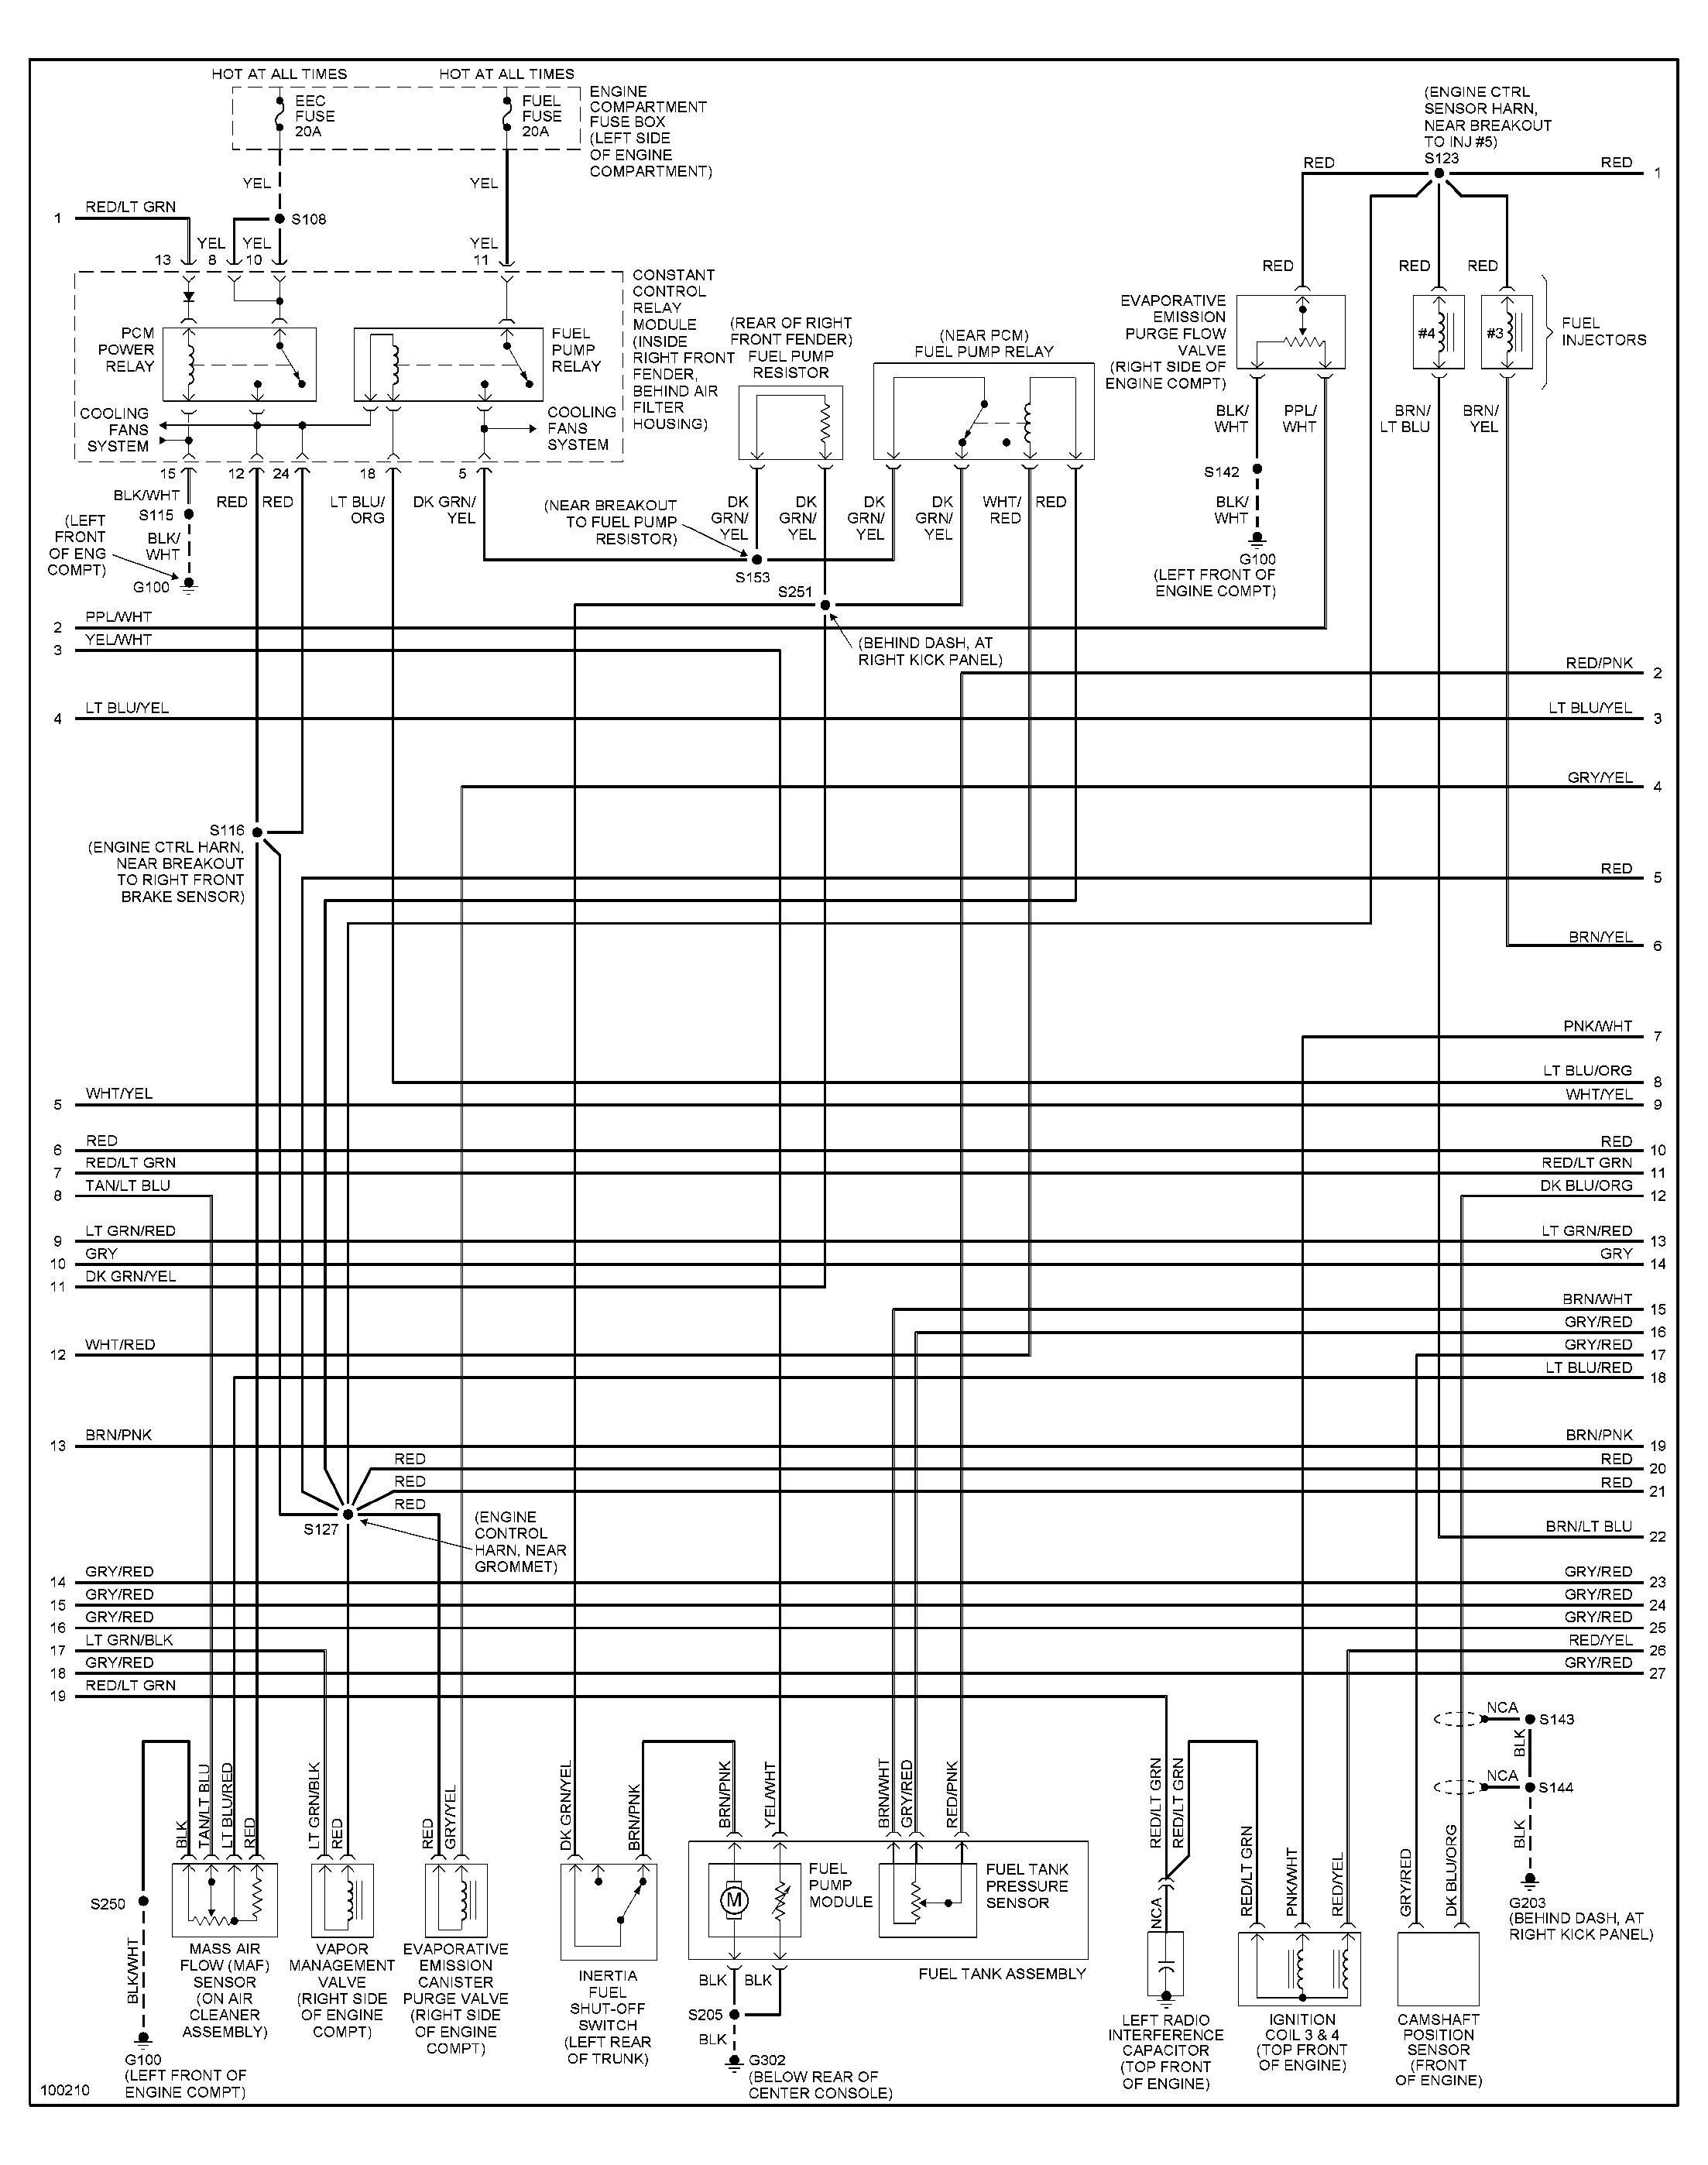 93 Mustang Wiring Diagram ford Mustang Gt 98 Fuel Pump Not Working Tried Checking at 1998 Of 93 Mustang Wiring Diagram